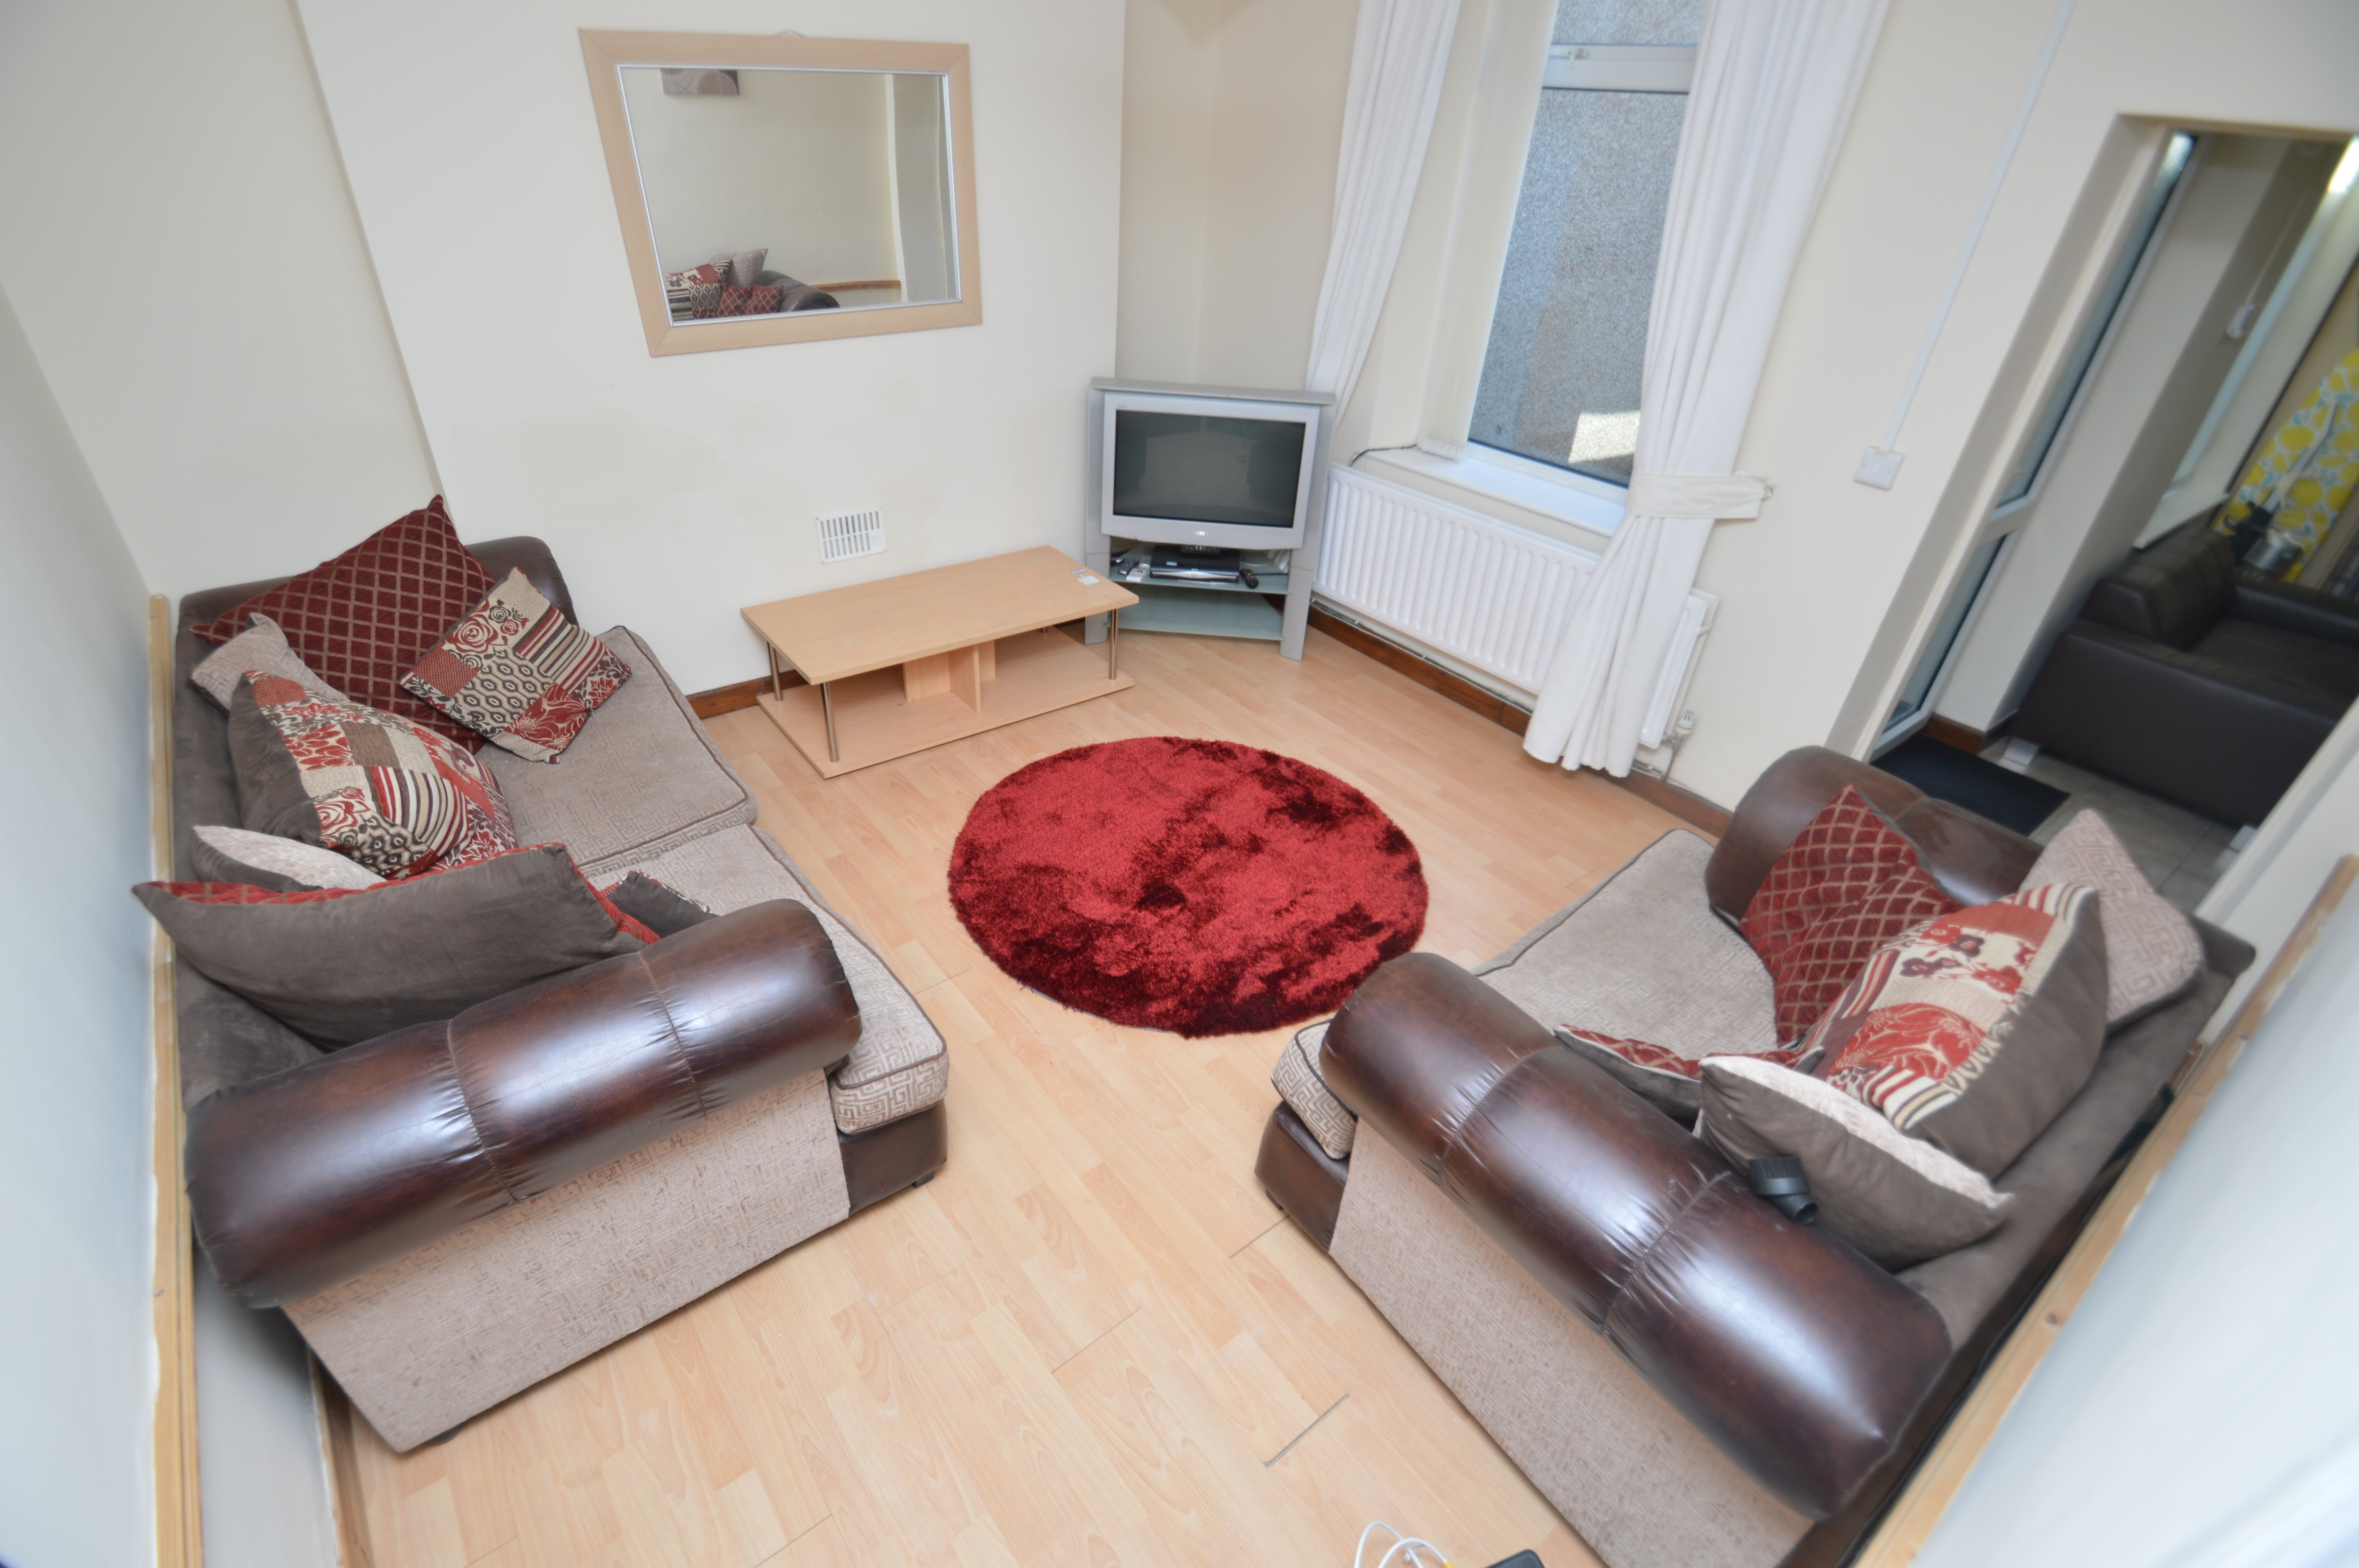 1 bed house / flat share to rent in Wood Road , Treforest   - Property Image 3